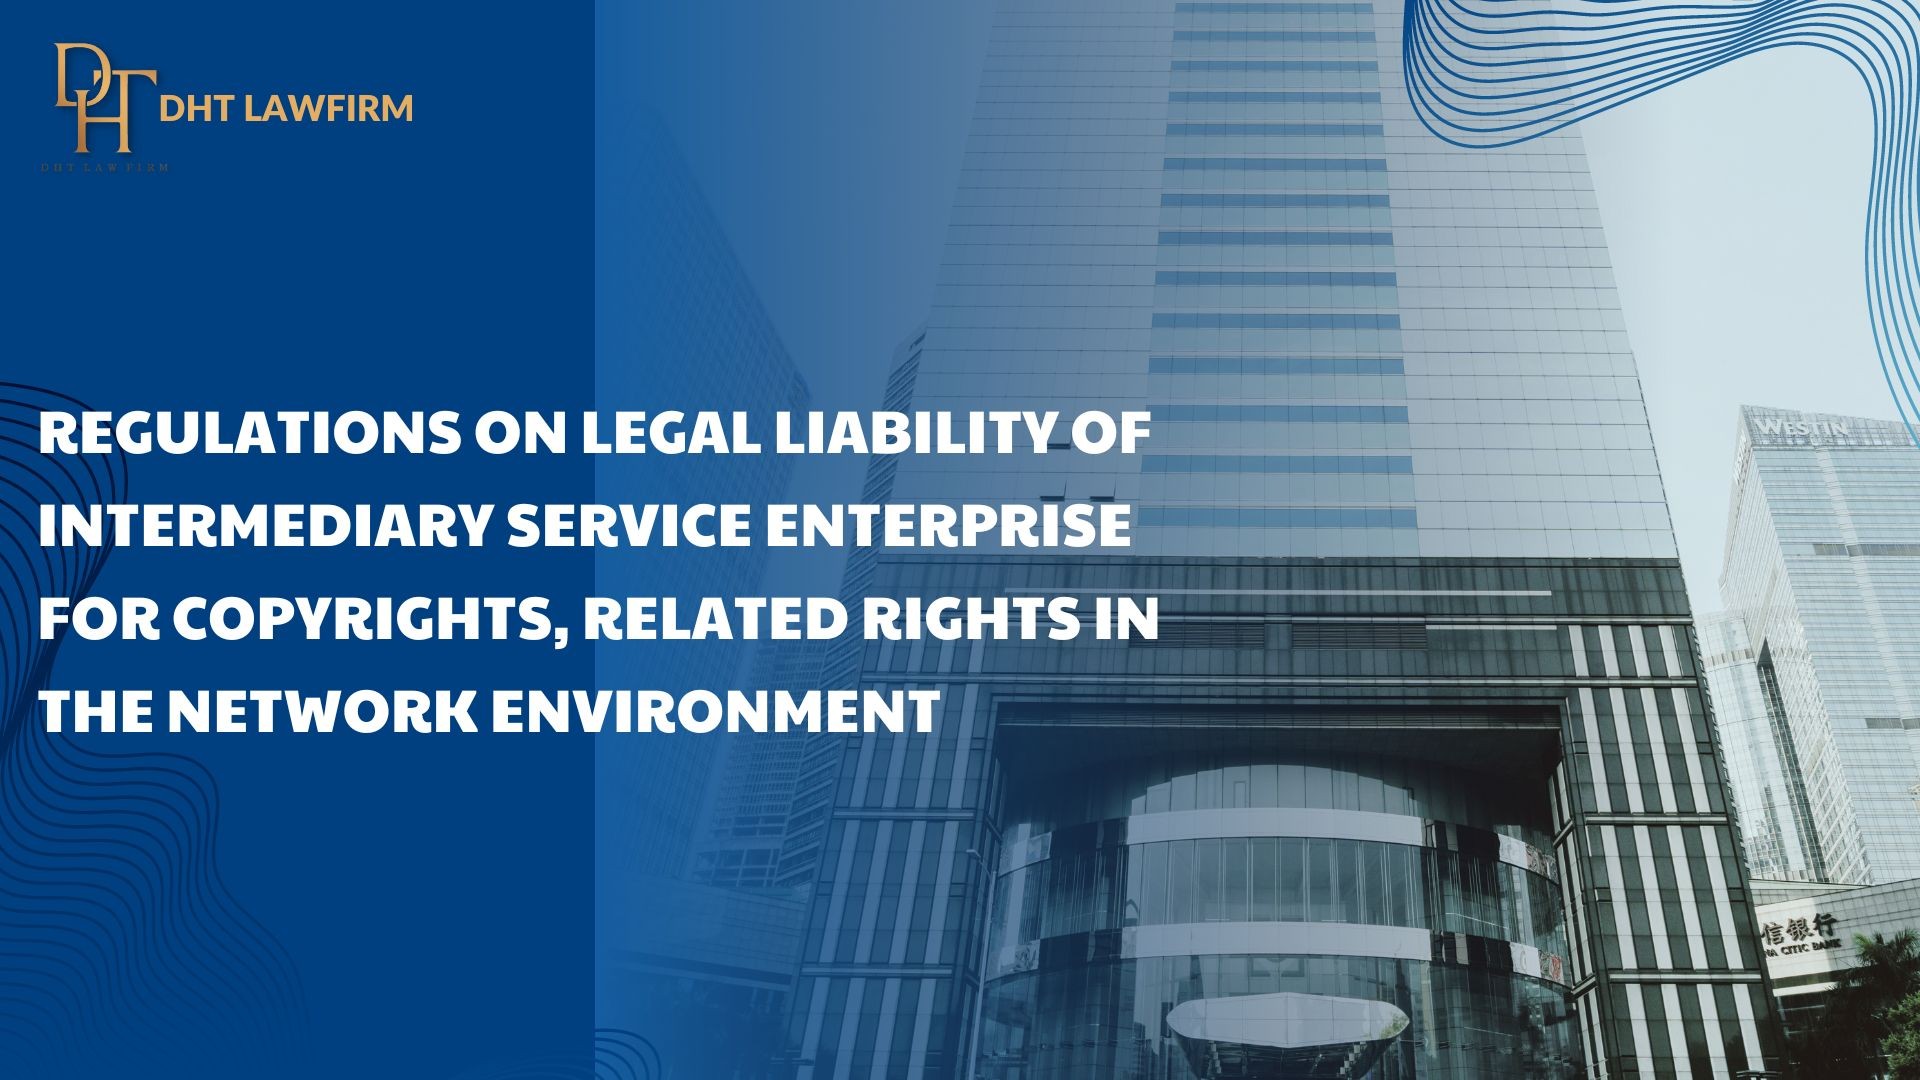 REGULATIONS ON LEGAL LIABILITY OF INTERMEDIARY SERVICE ENTERPRISE FOR COPYRIGHTS, RELATED RIGHTS IN THE NETWORK ENVIRONMENT